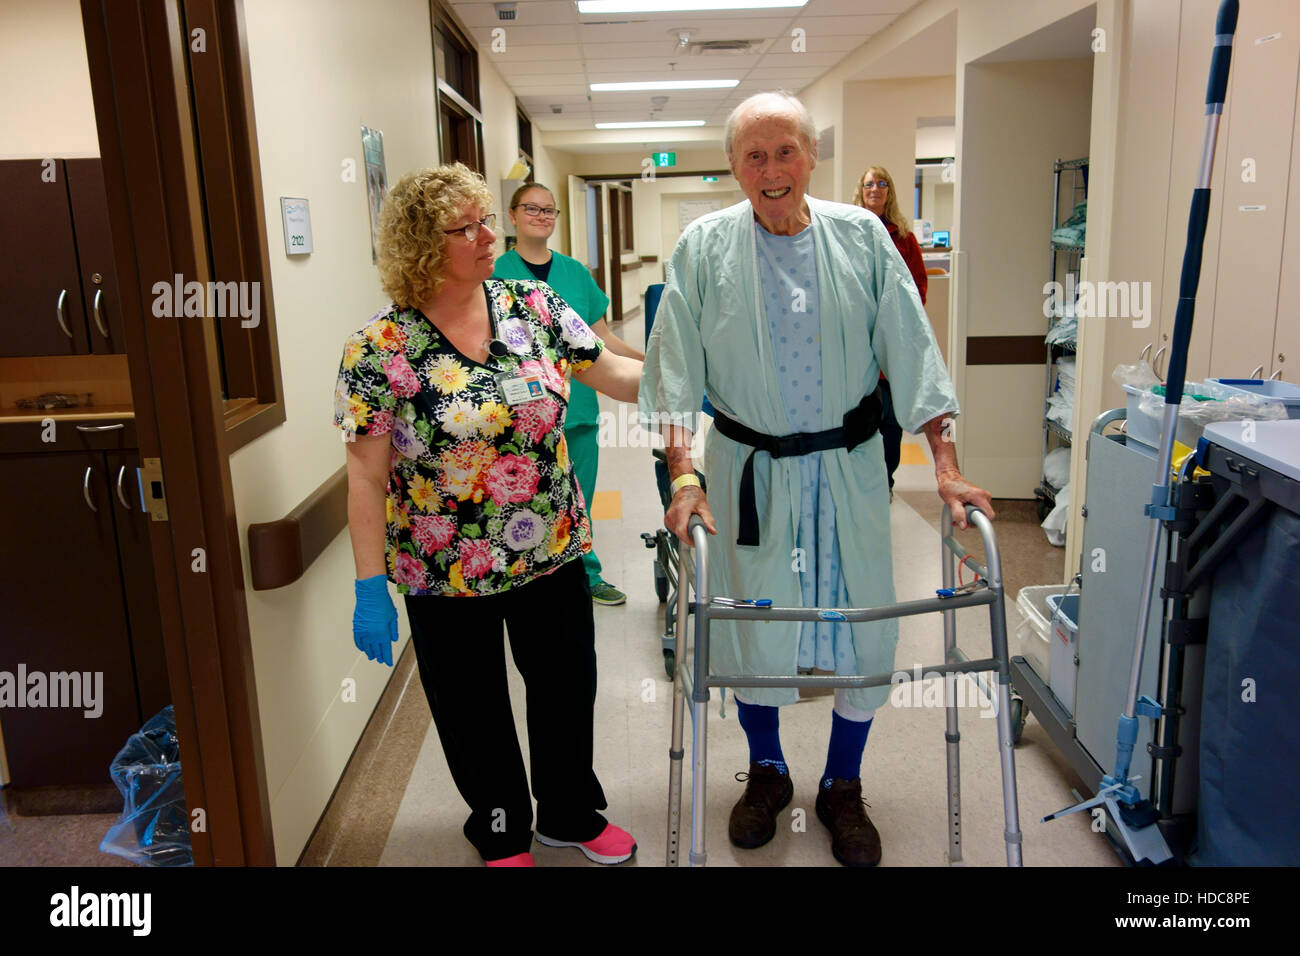 An elderly man walking with assistance in a hospital for recovery Stock Photo